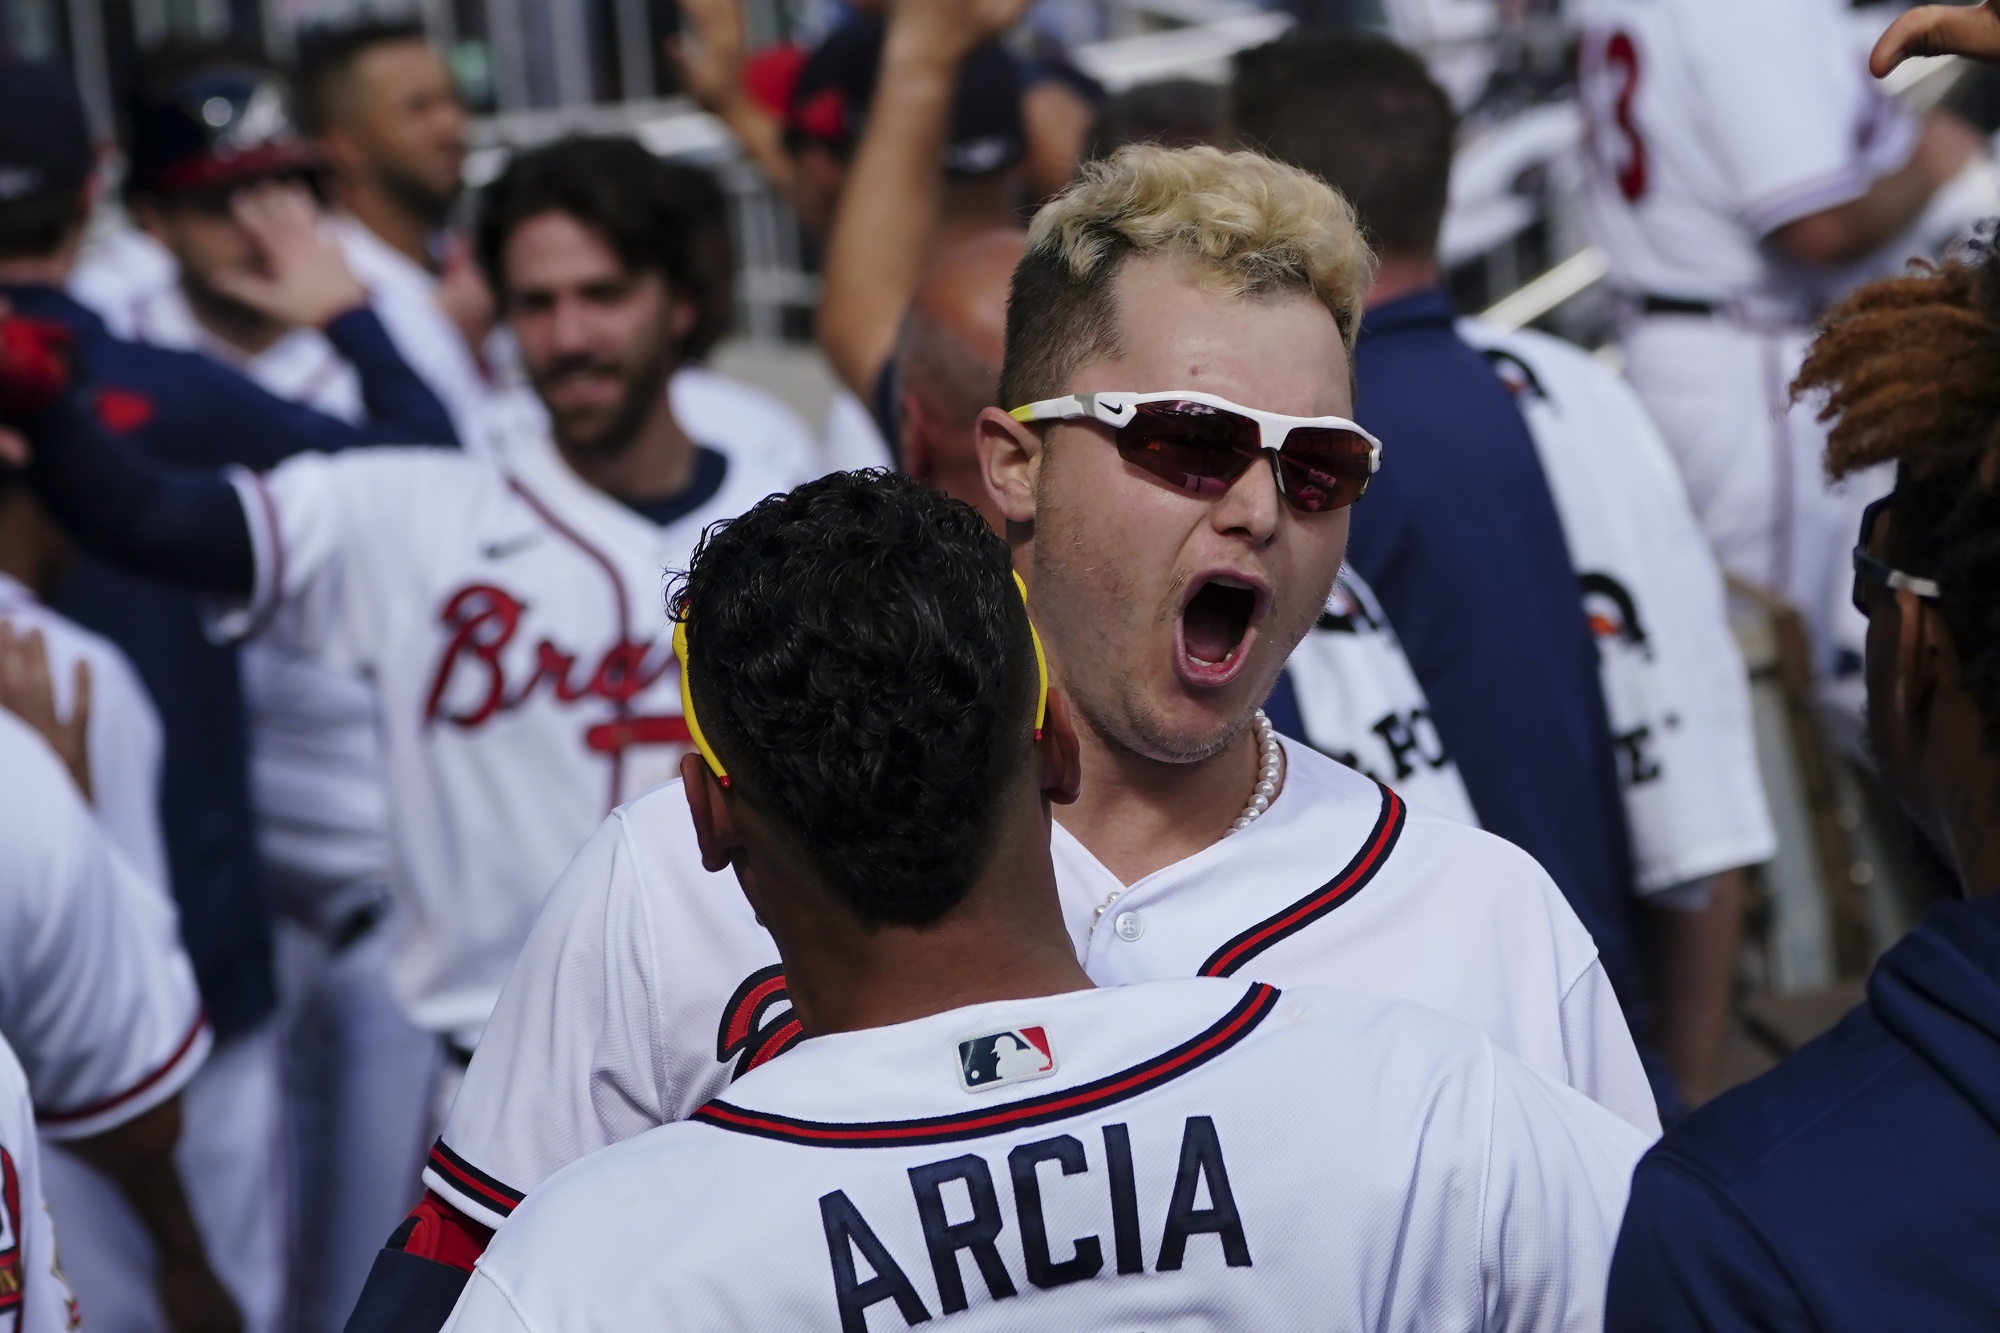 Pederson 3-run HR, Braves Blank Brewers for 2-1 NLDS Lead - Bloomberg